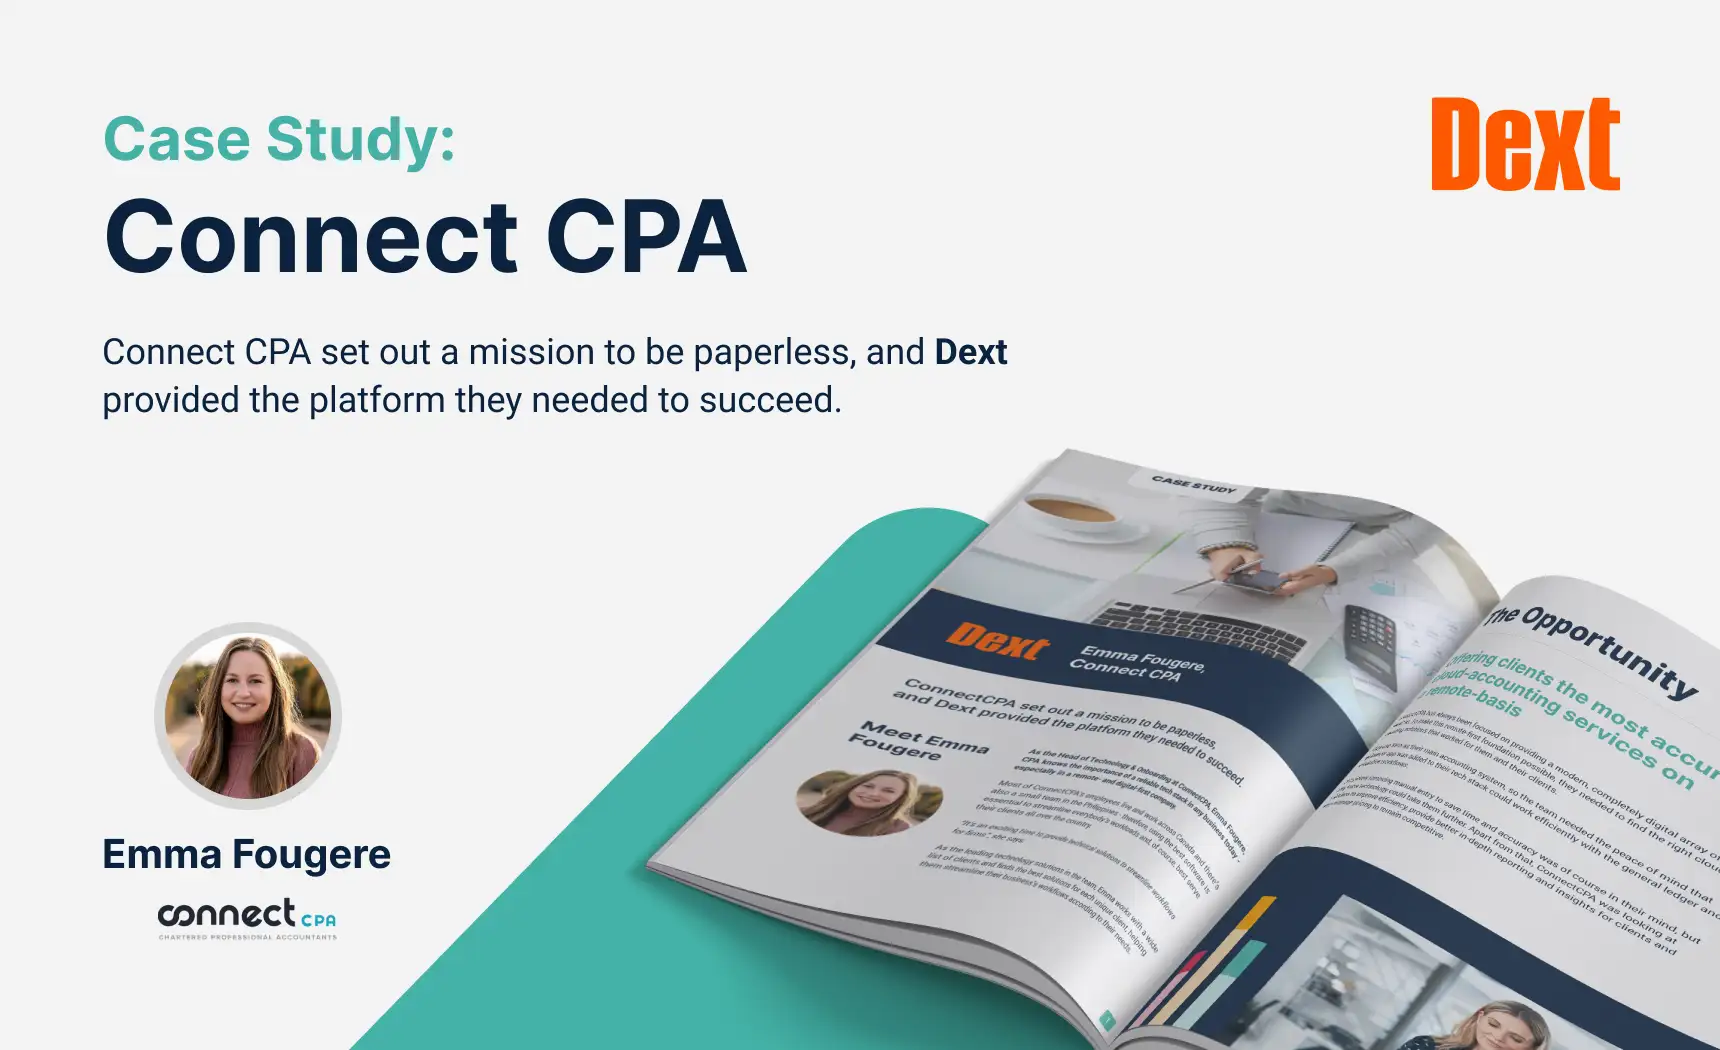 Case Study: Emma Fougere, ConnectCPA logo